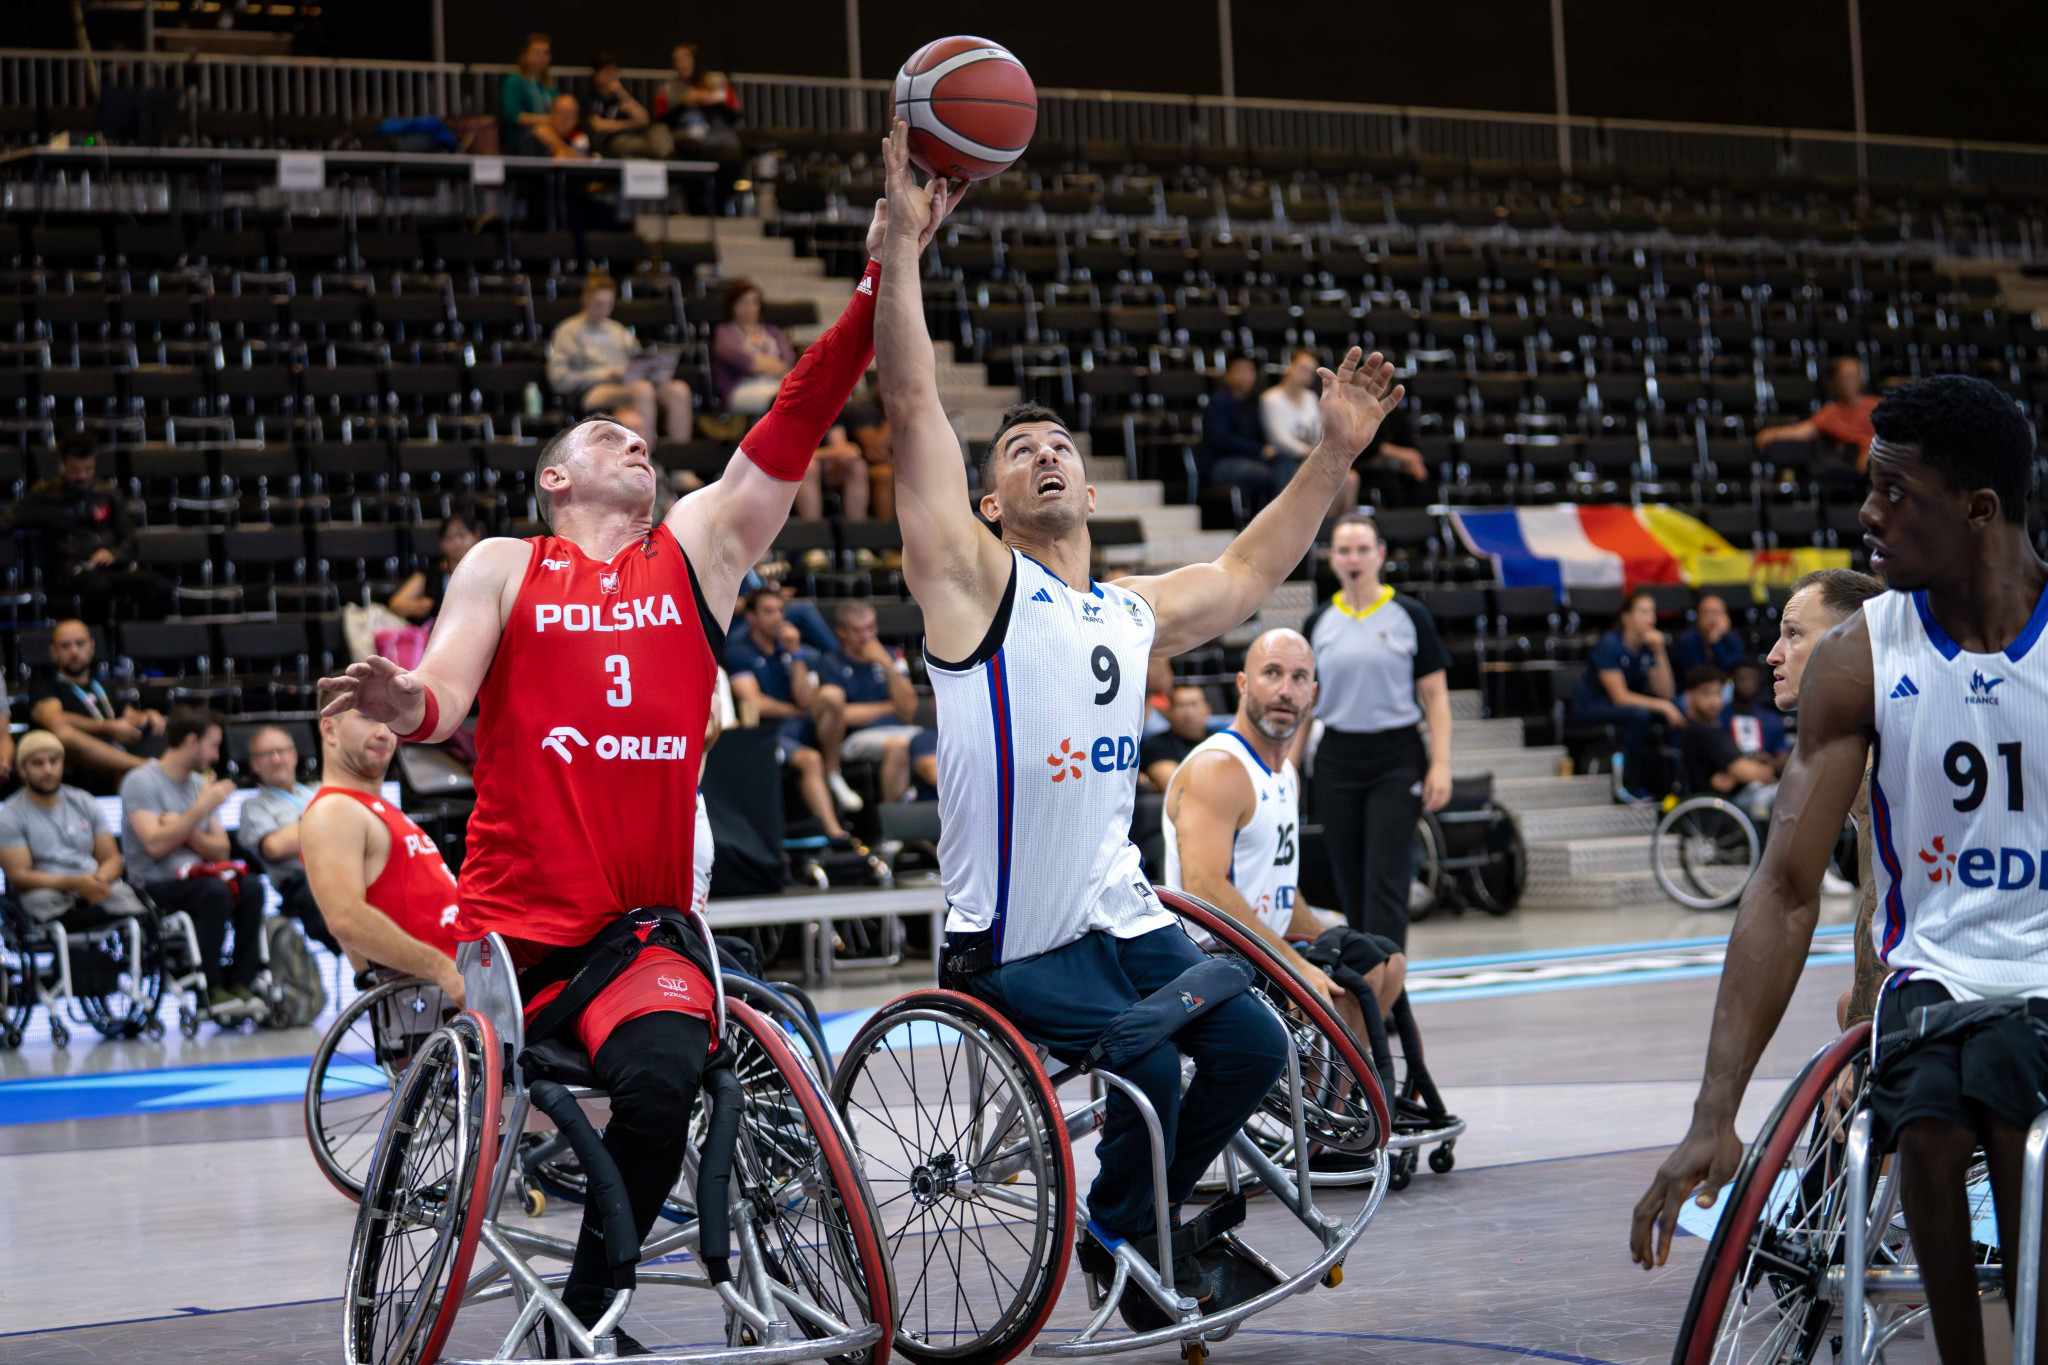 France overcame Poland 80-67 to seal seventh place in the tournament ©EPC